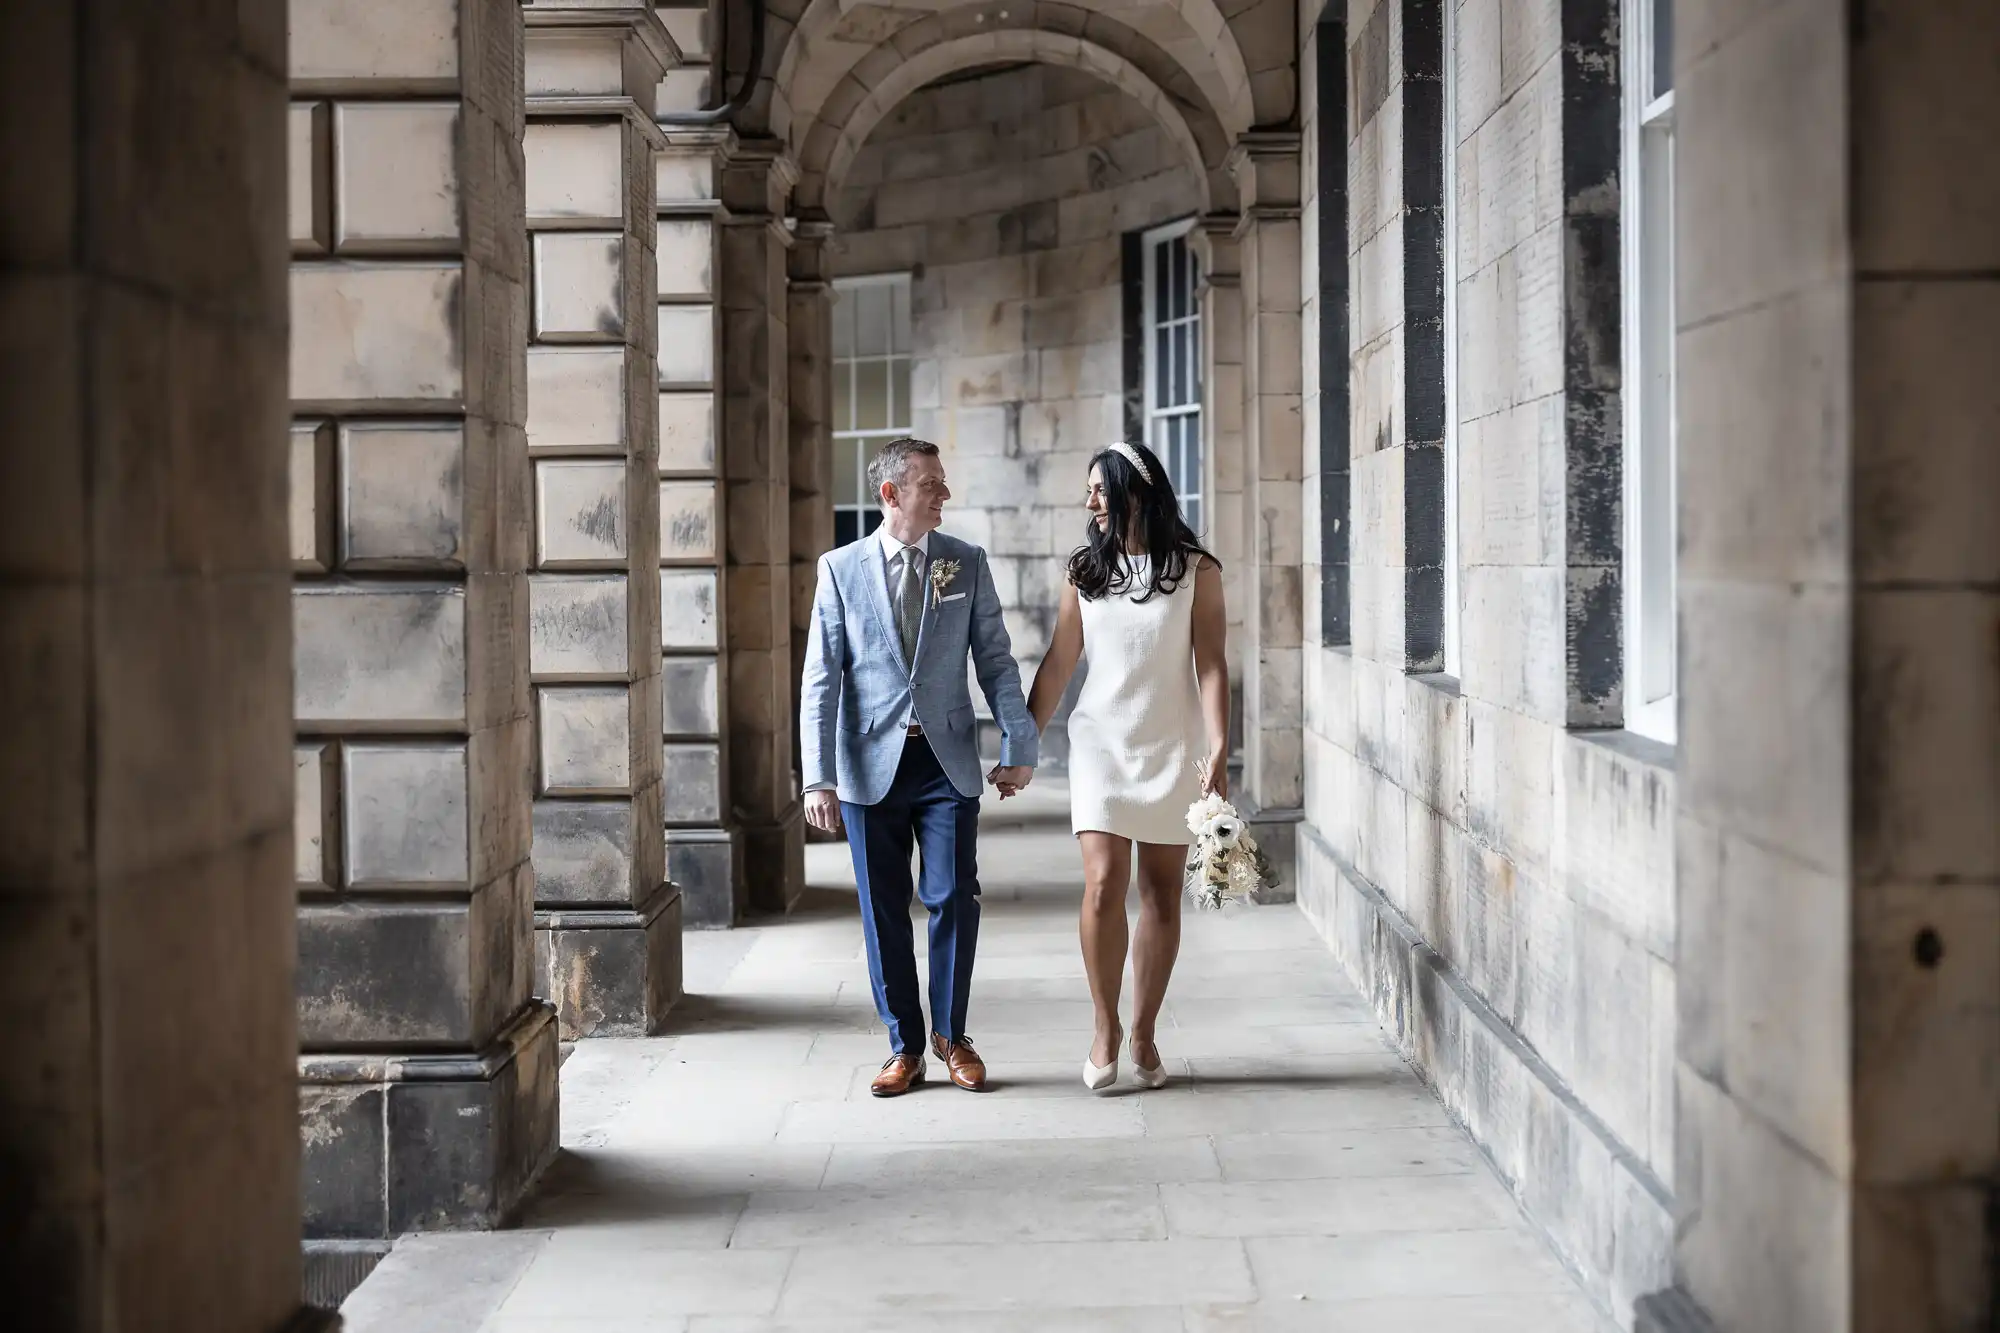 A couple is walking hand in hand through a stone corridor. The man is wearing a light blue suit, and the woman is wearing a short white dress, holding a small bouquet of flowers.